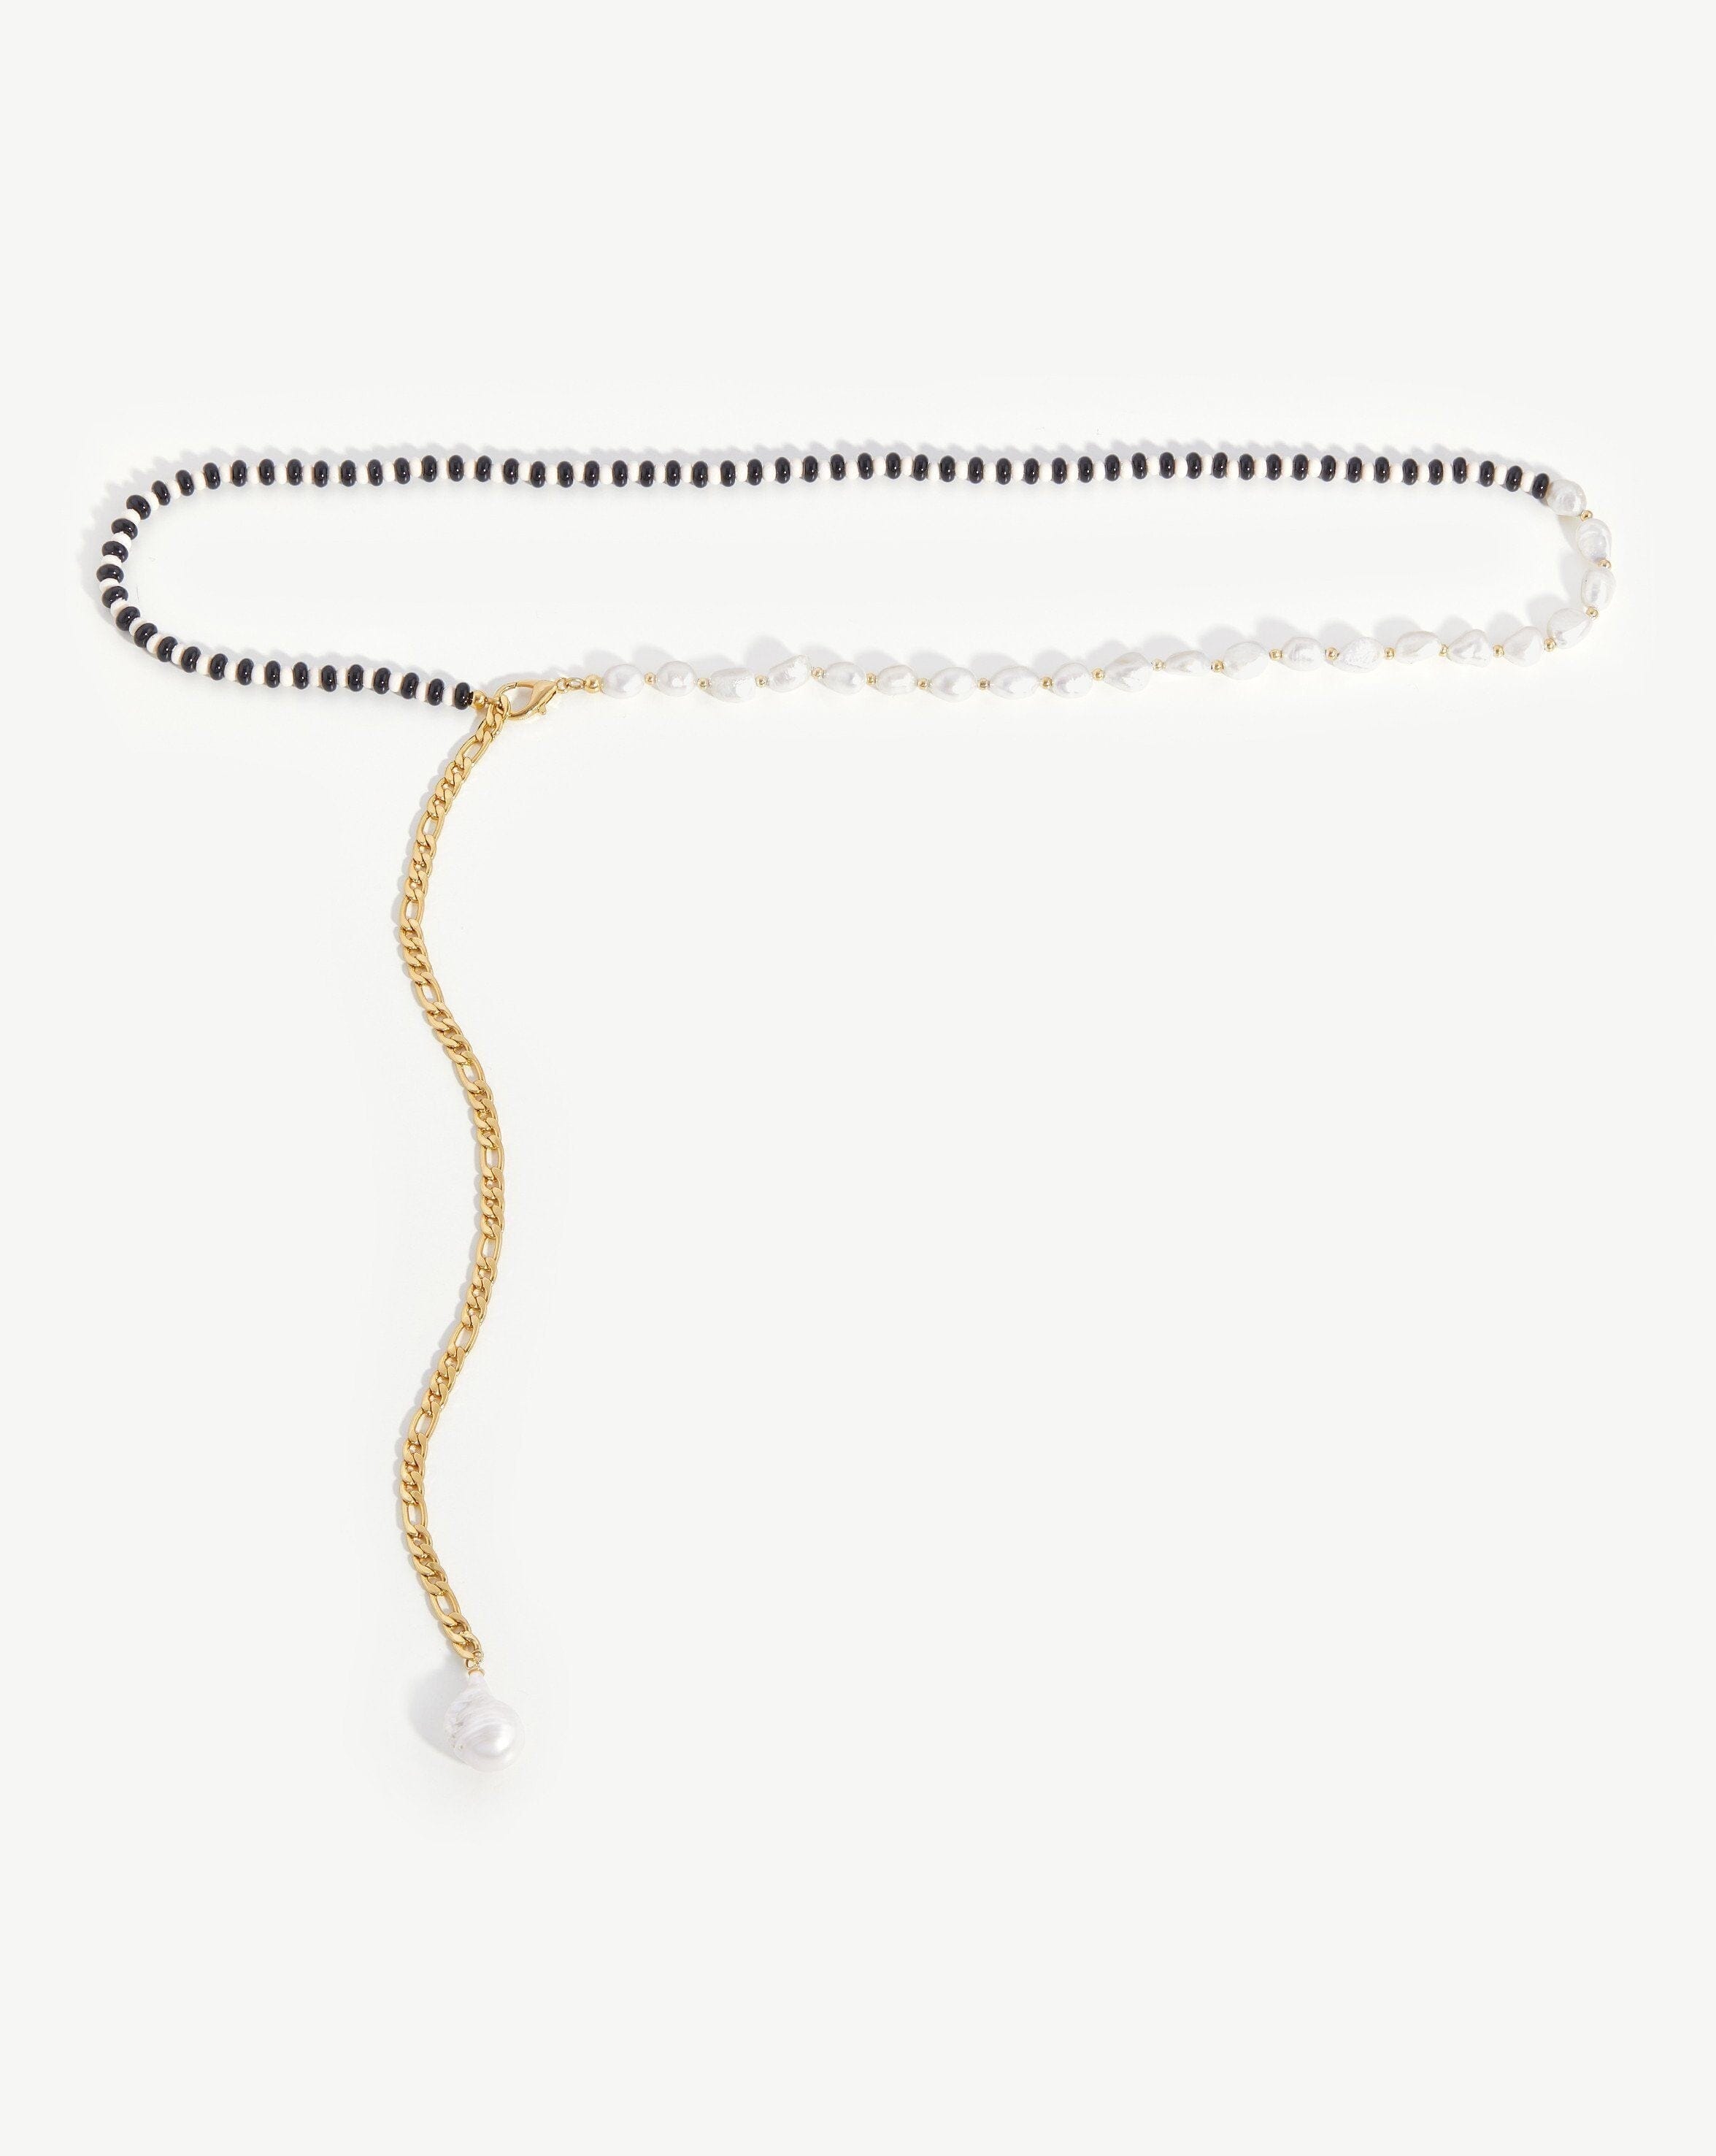 Baroque Pearl & Beaded Figaro Chain Belt Accessories Missoma 18ct Gold Plated/Pearl & Black Bead S/M 